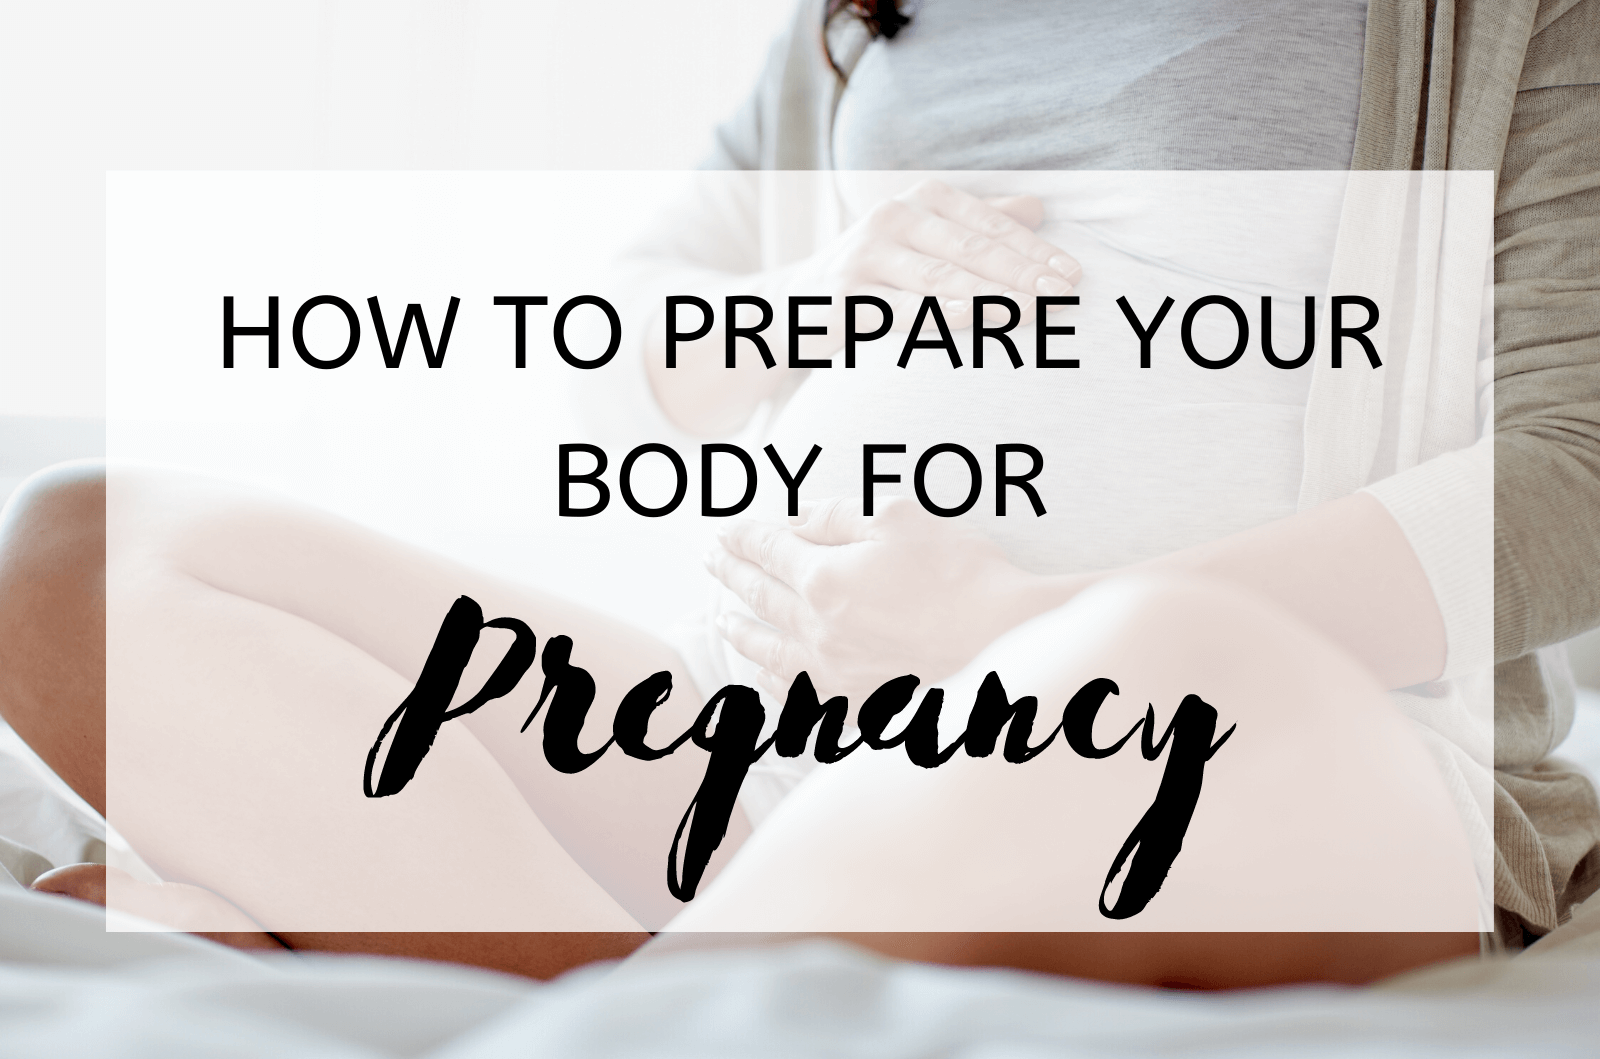 How To Prepare Your Body For Pregnancy (1)